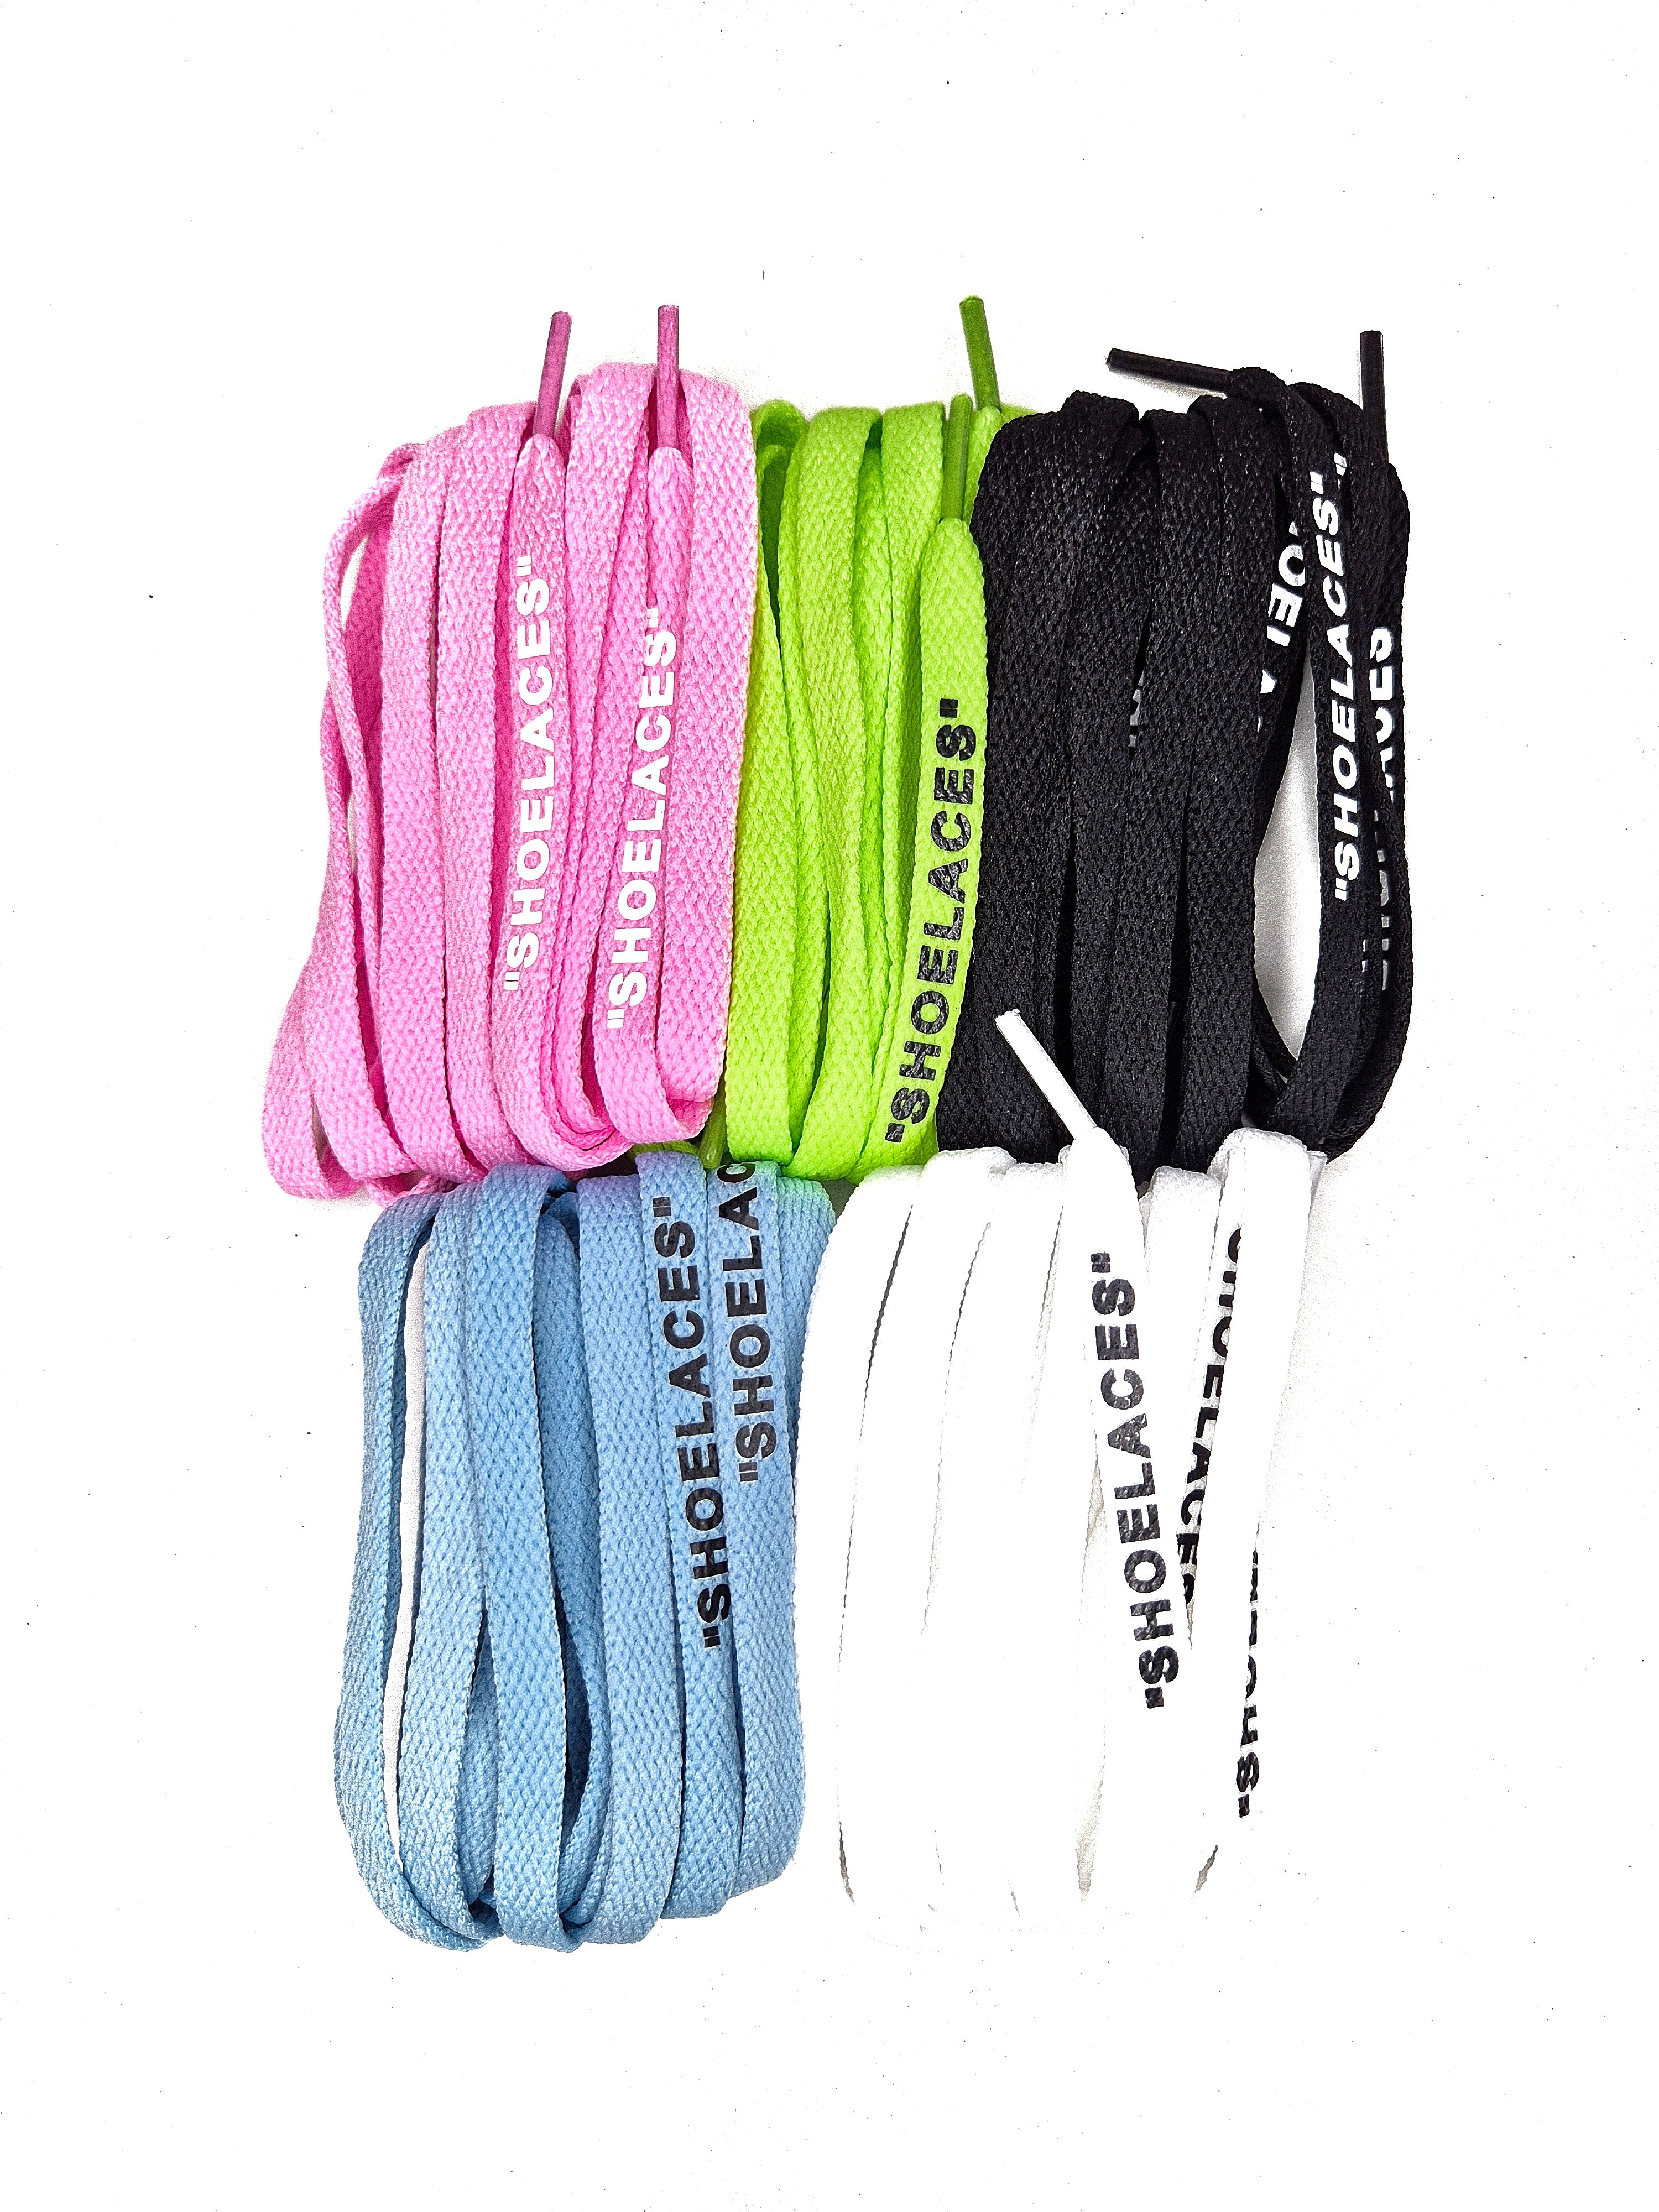 The Goodlace  OFF-WHITE STYLE "SHOELACES" ULTIMATE 5 PAIR COMBO